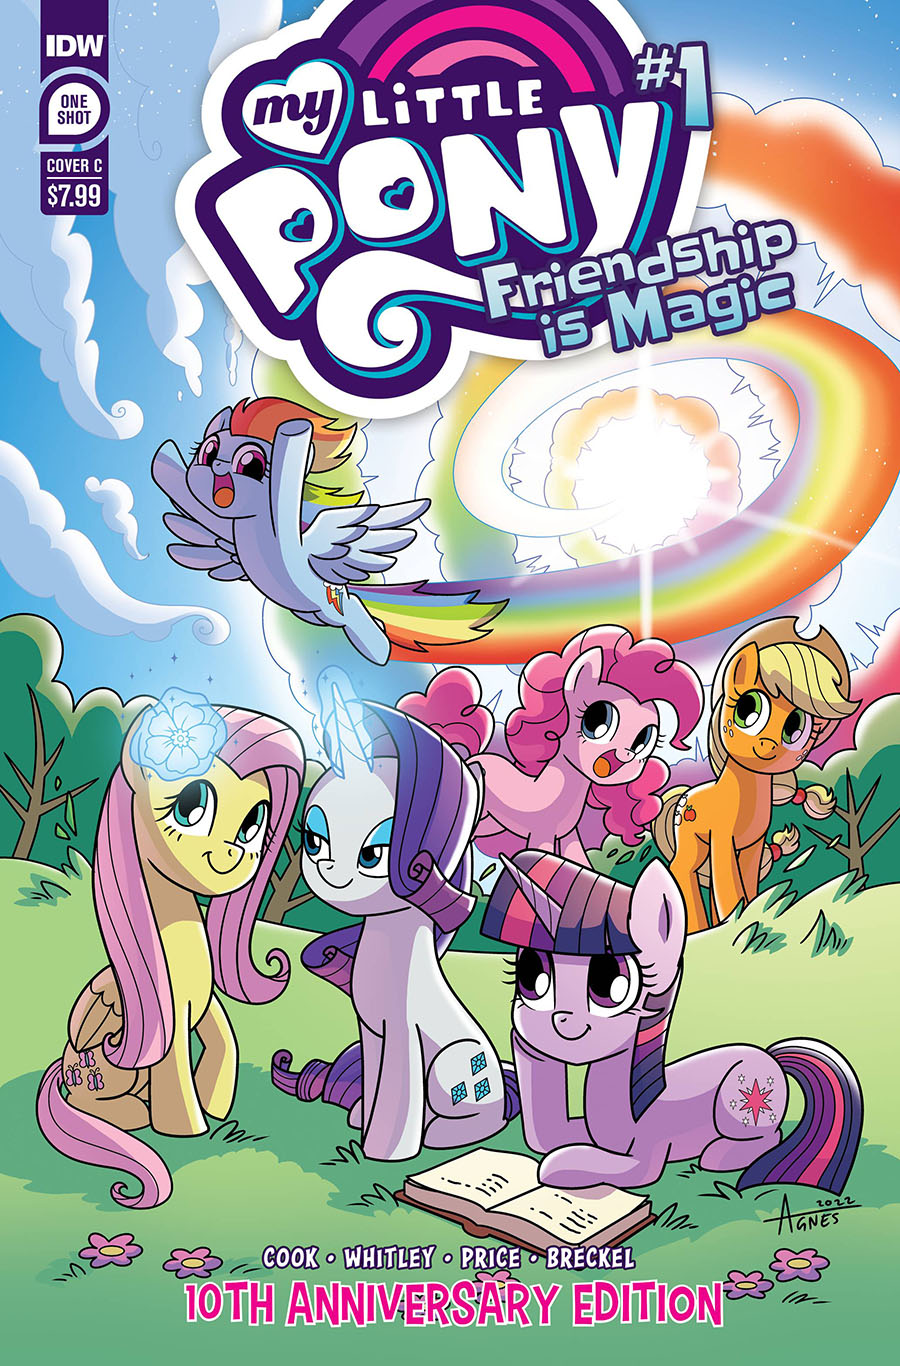 My Little Pony Friendship Is Magic 10th Anniversary Edition #1 (One Shot) Cover C Variant Agnes Garbowska Cover